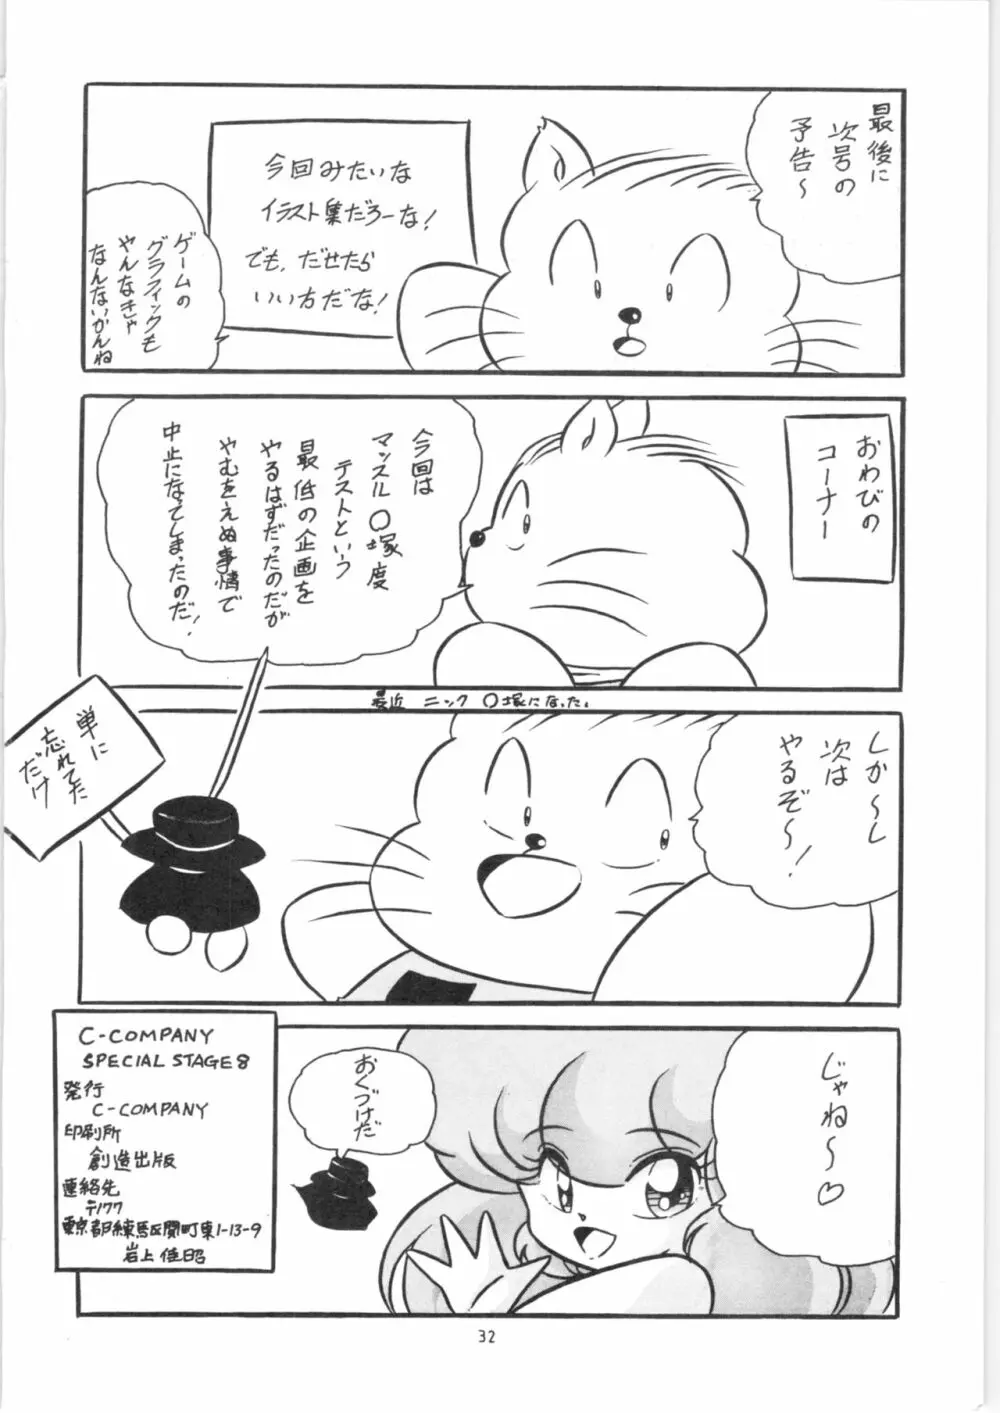 C-COMPANY SPECIAL STAGE 8 Page.33